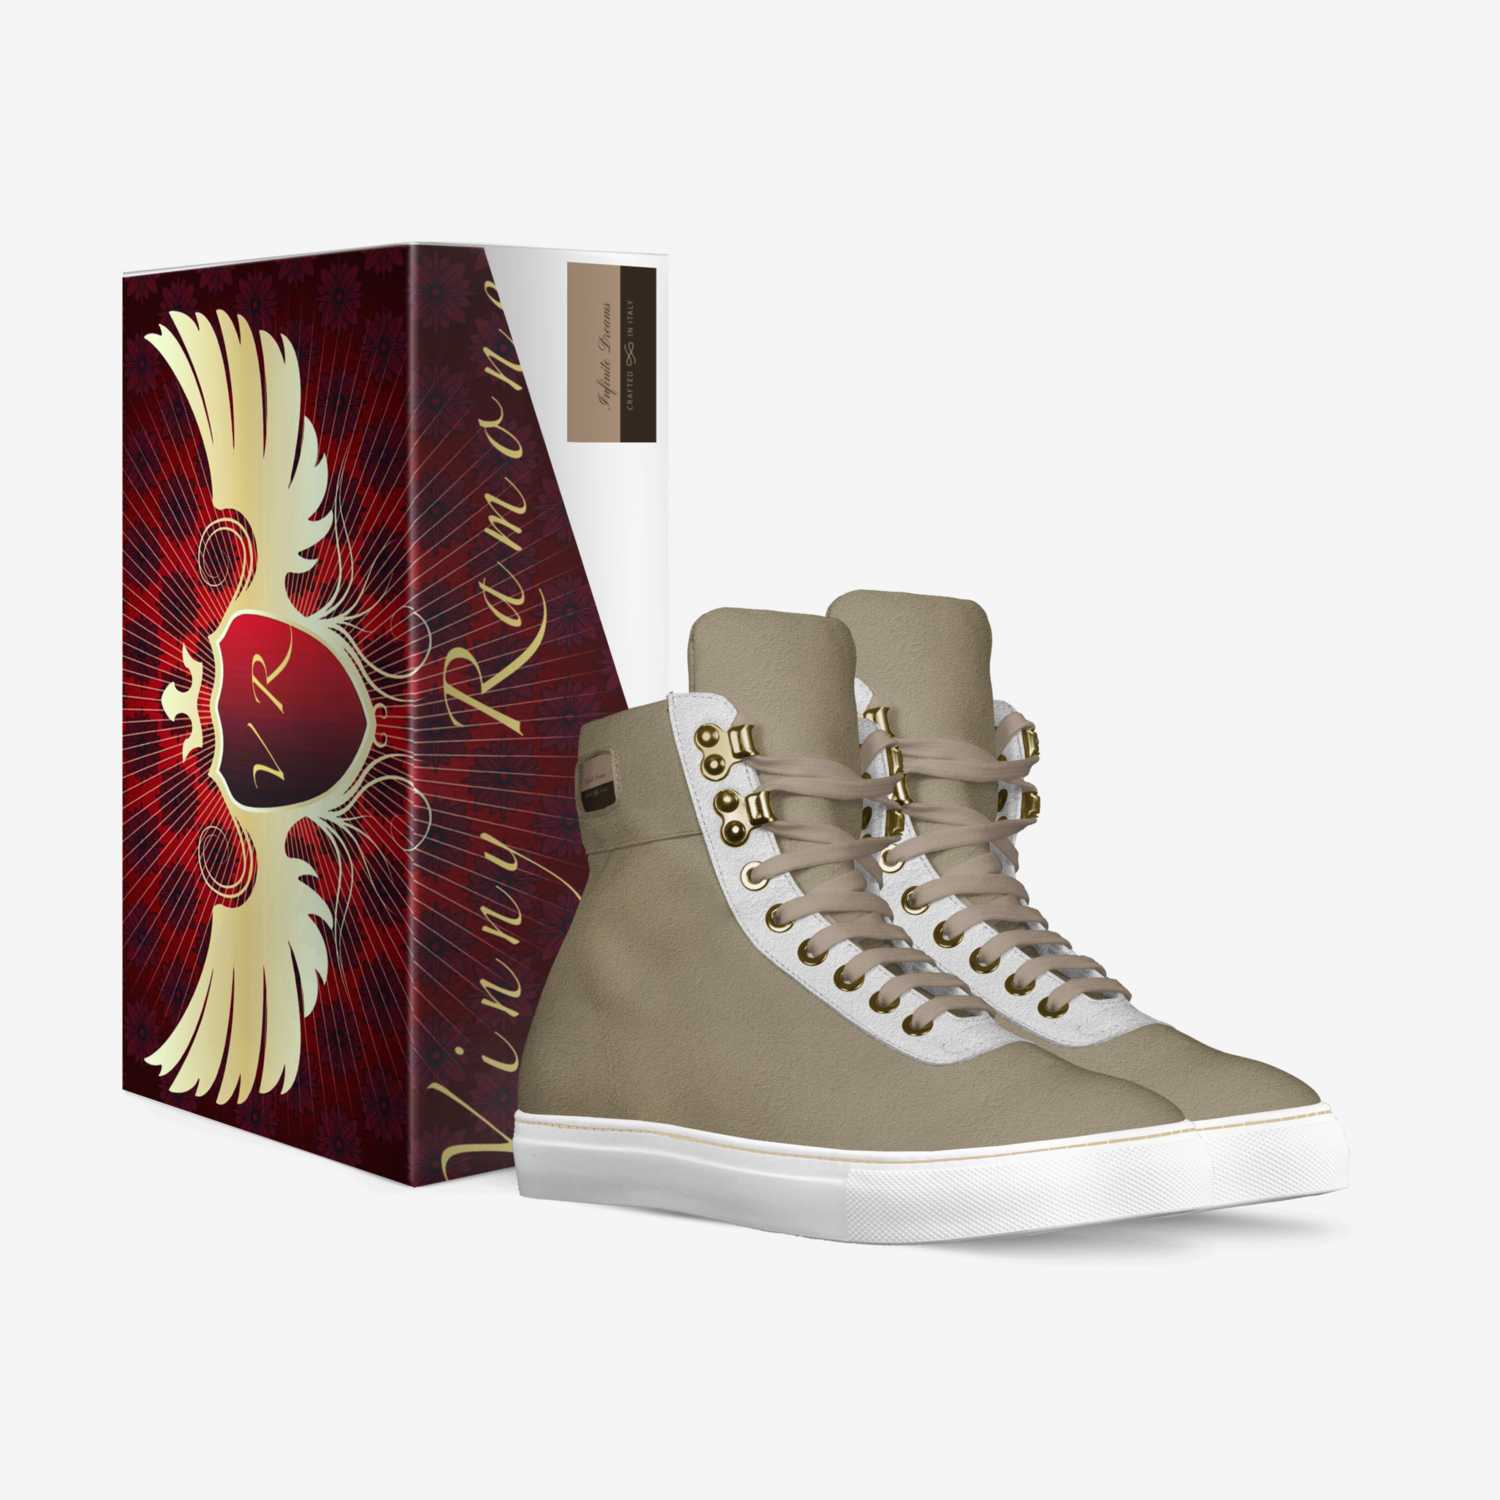 Infinite Dreams custom made in Italy shoes by Vinny Ramone | Box view